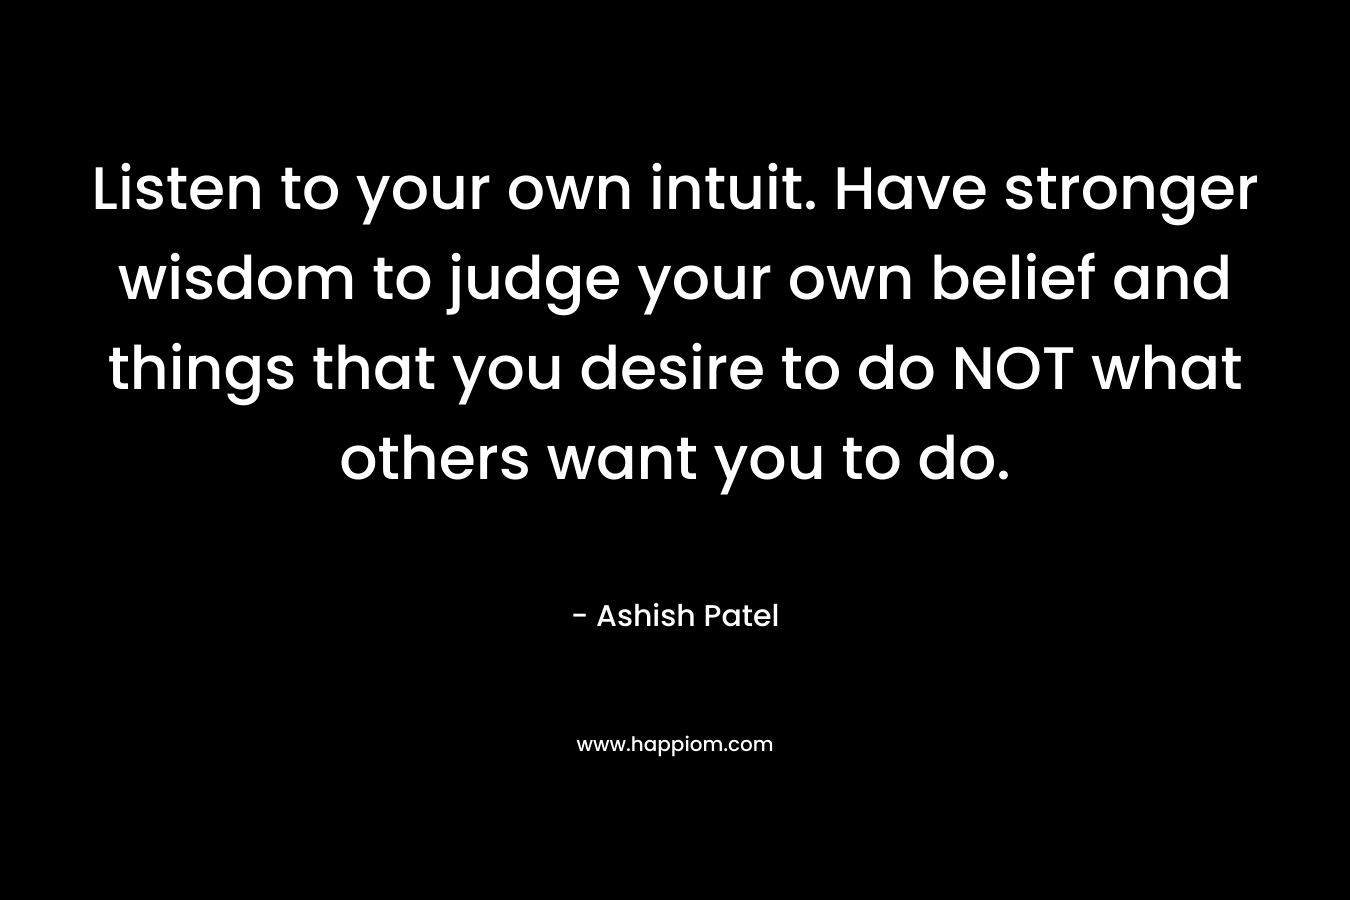 Listen to your own intuit. Have stronger wisdom to judge your own belief and things that you desire to do NOT what others want you to do.